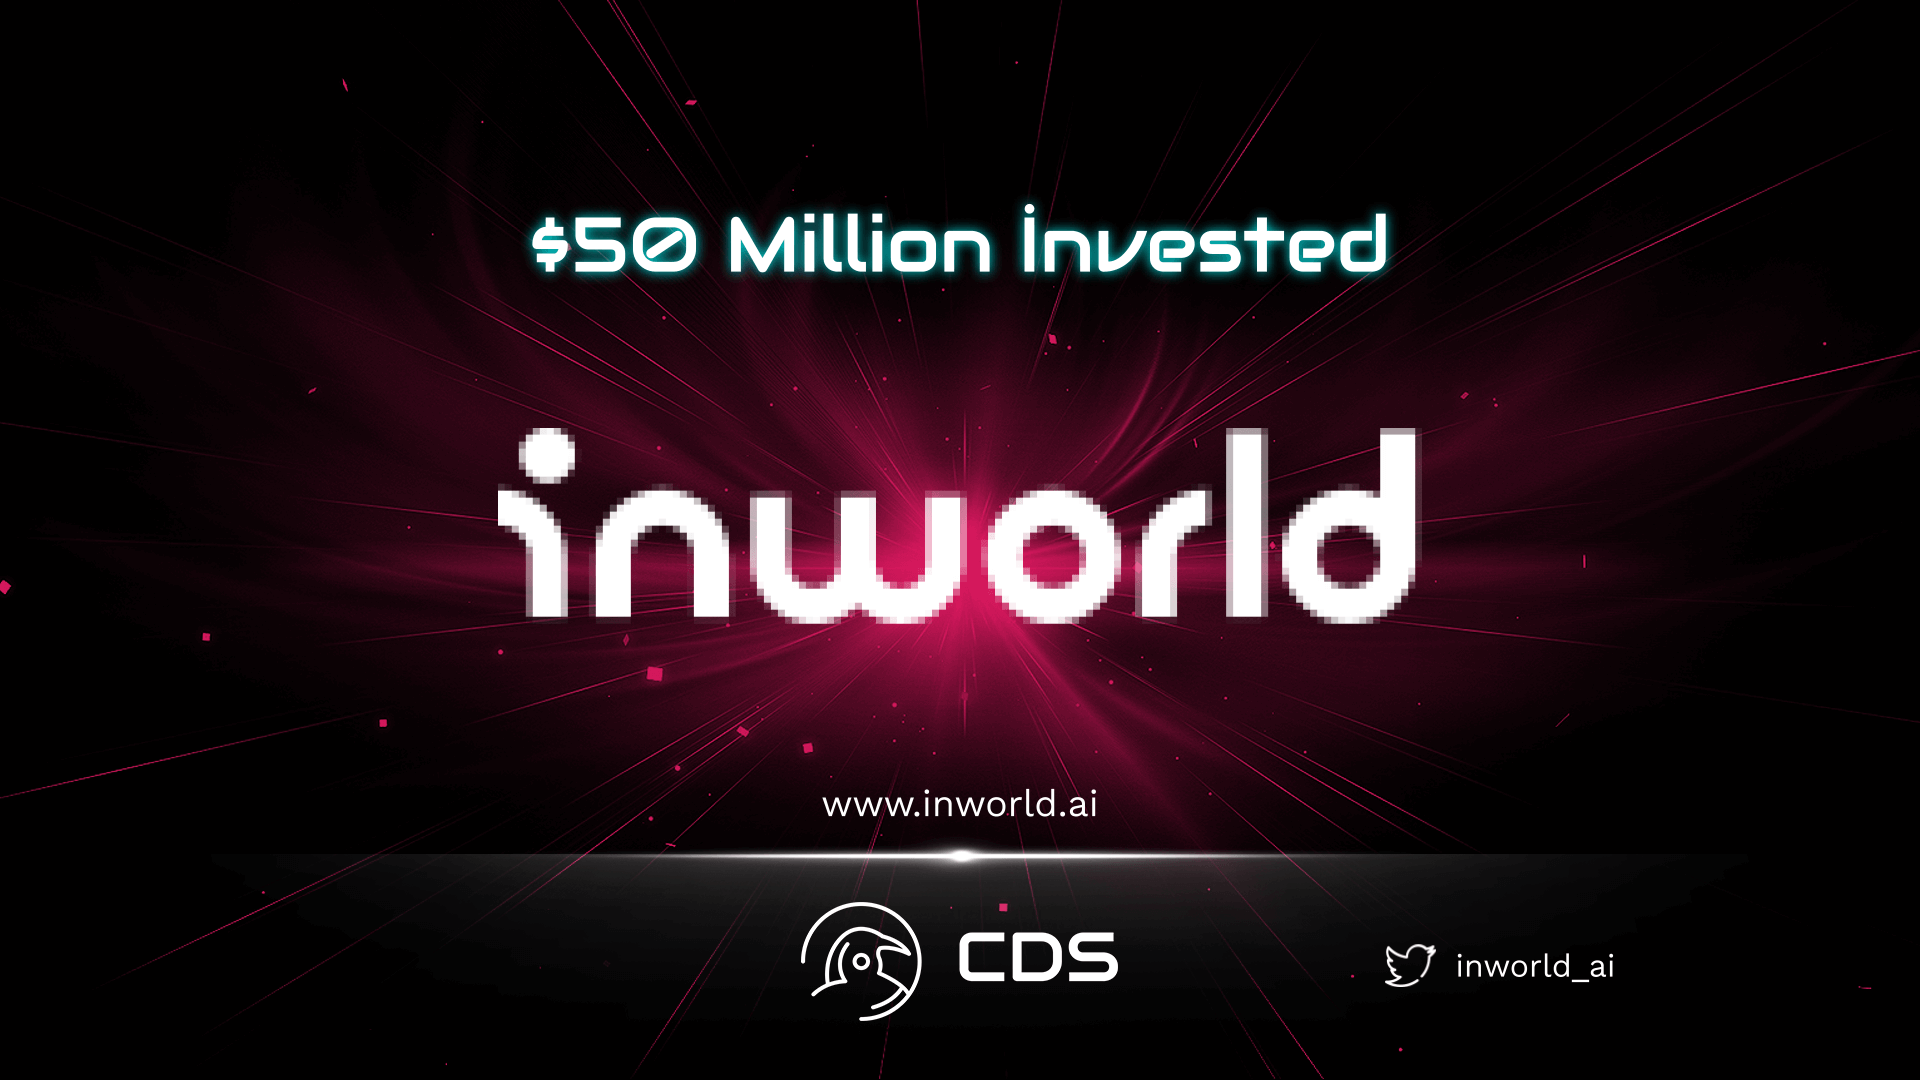 in world ai raised $50 million invested